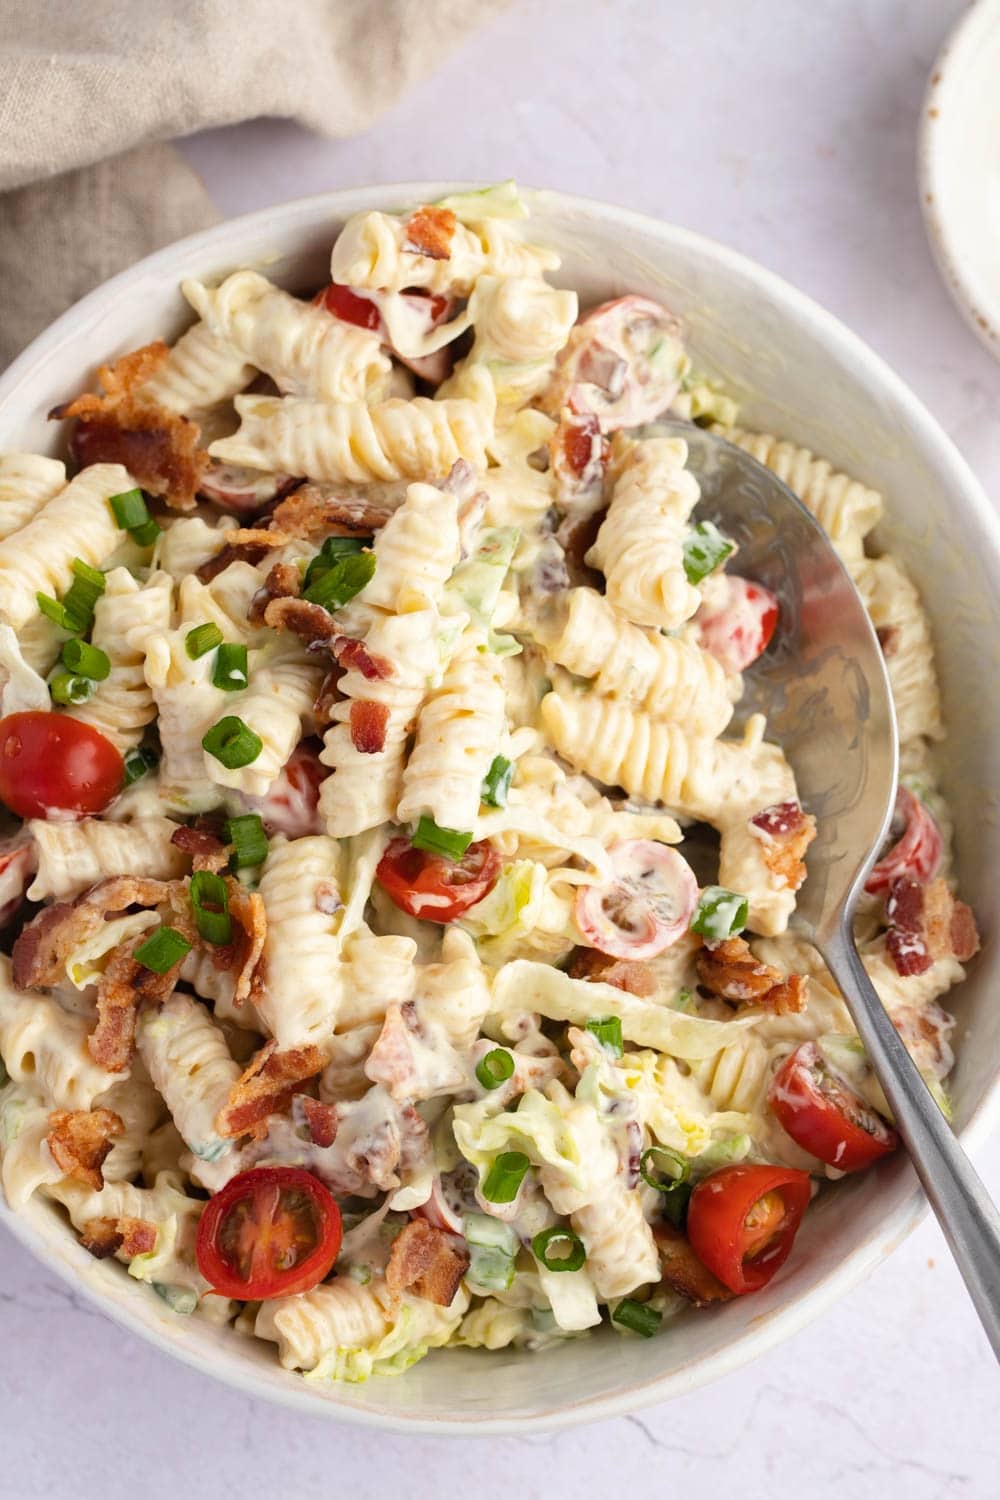 Top View of a Bowl Serving of Homemade BLT Pasta Salad With Spoon